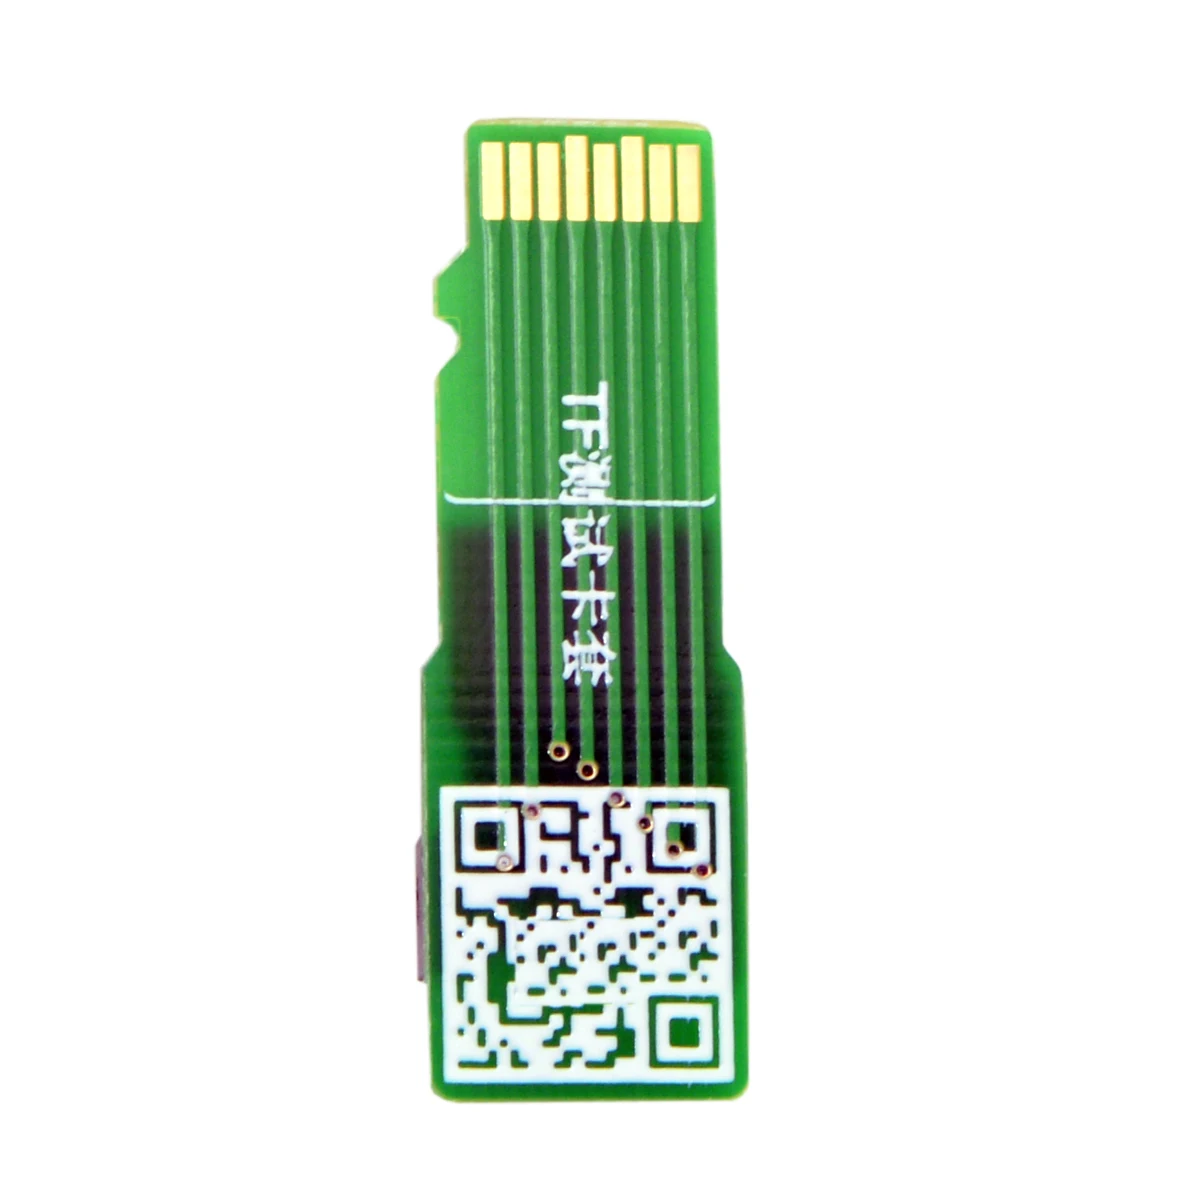 Chenyang-Cable Micro SD TF Memory Card Kit Male to Female Extension Adapter Extender Test Tools PCBA images - 6